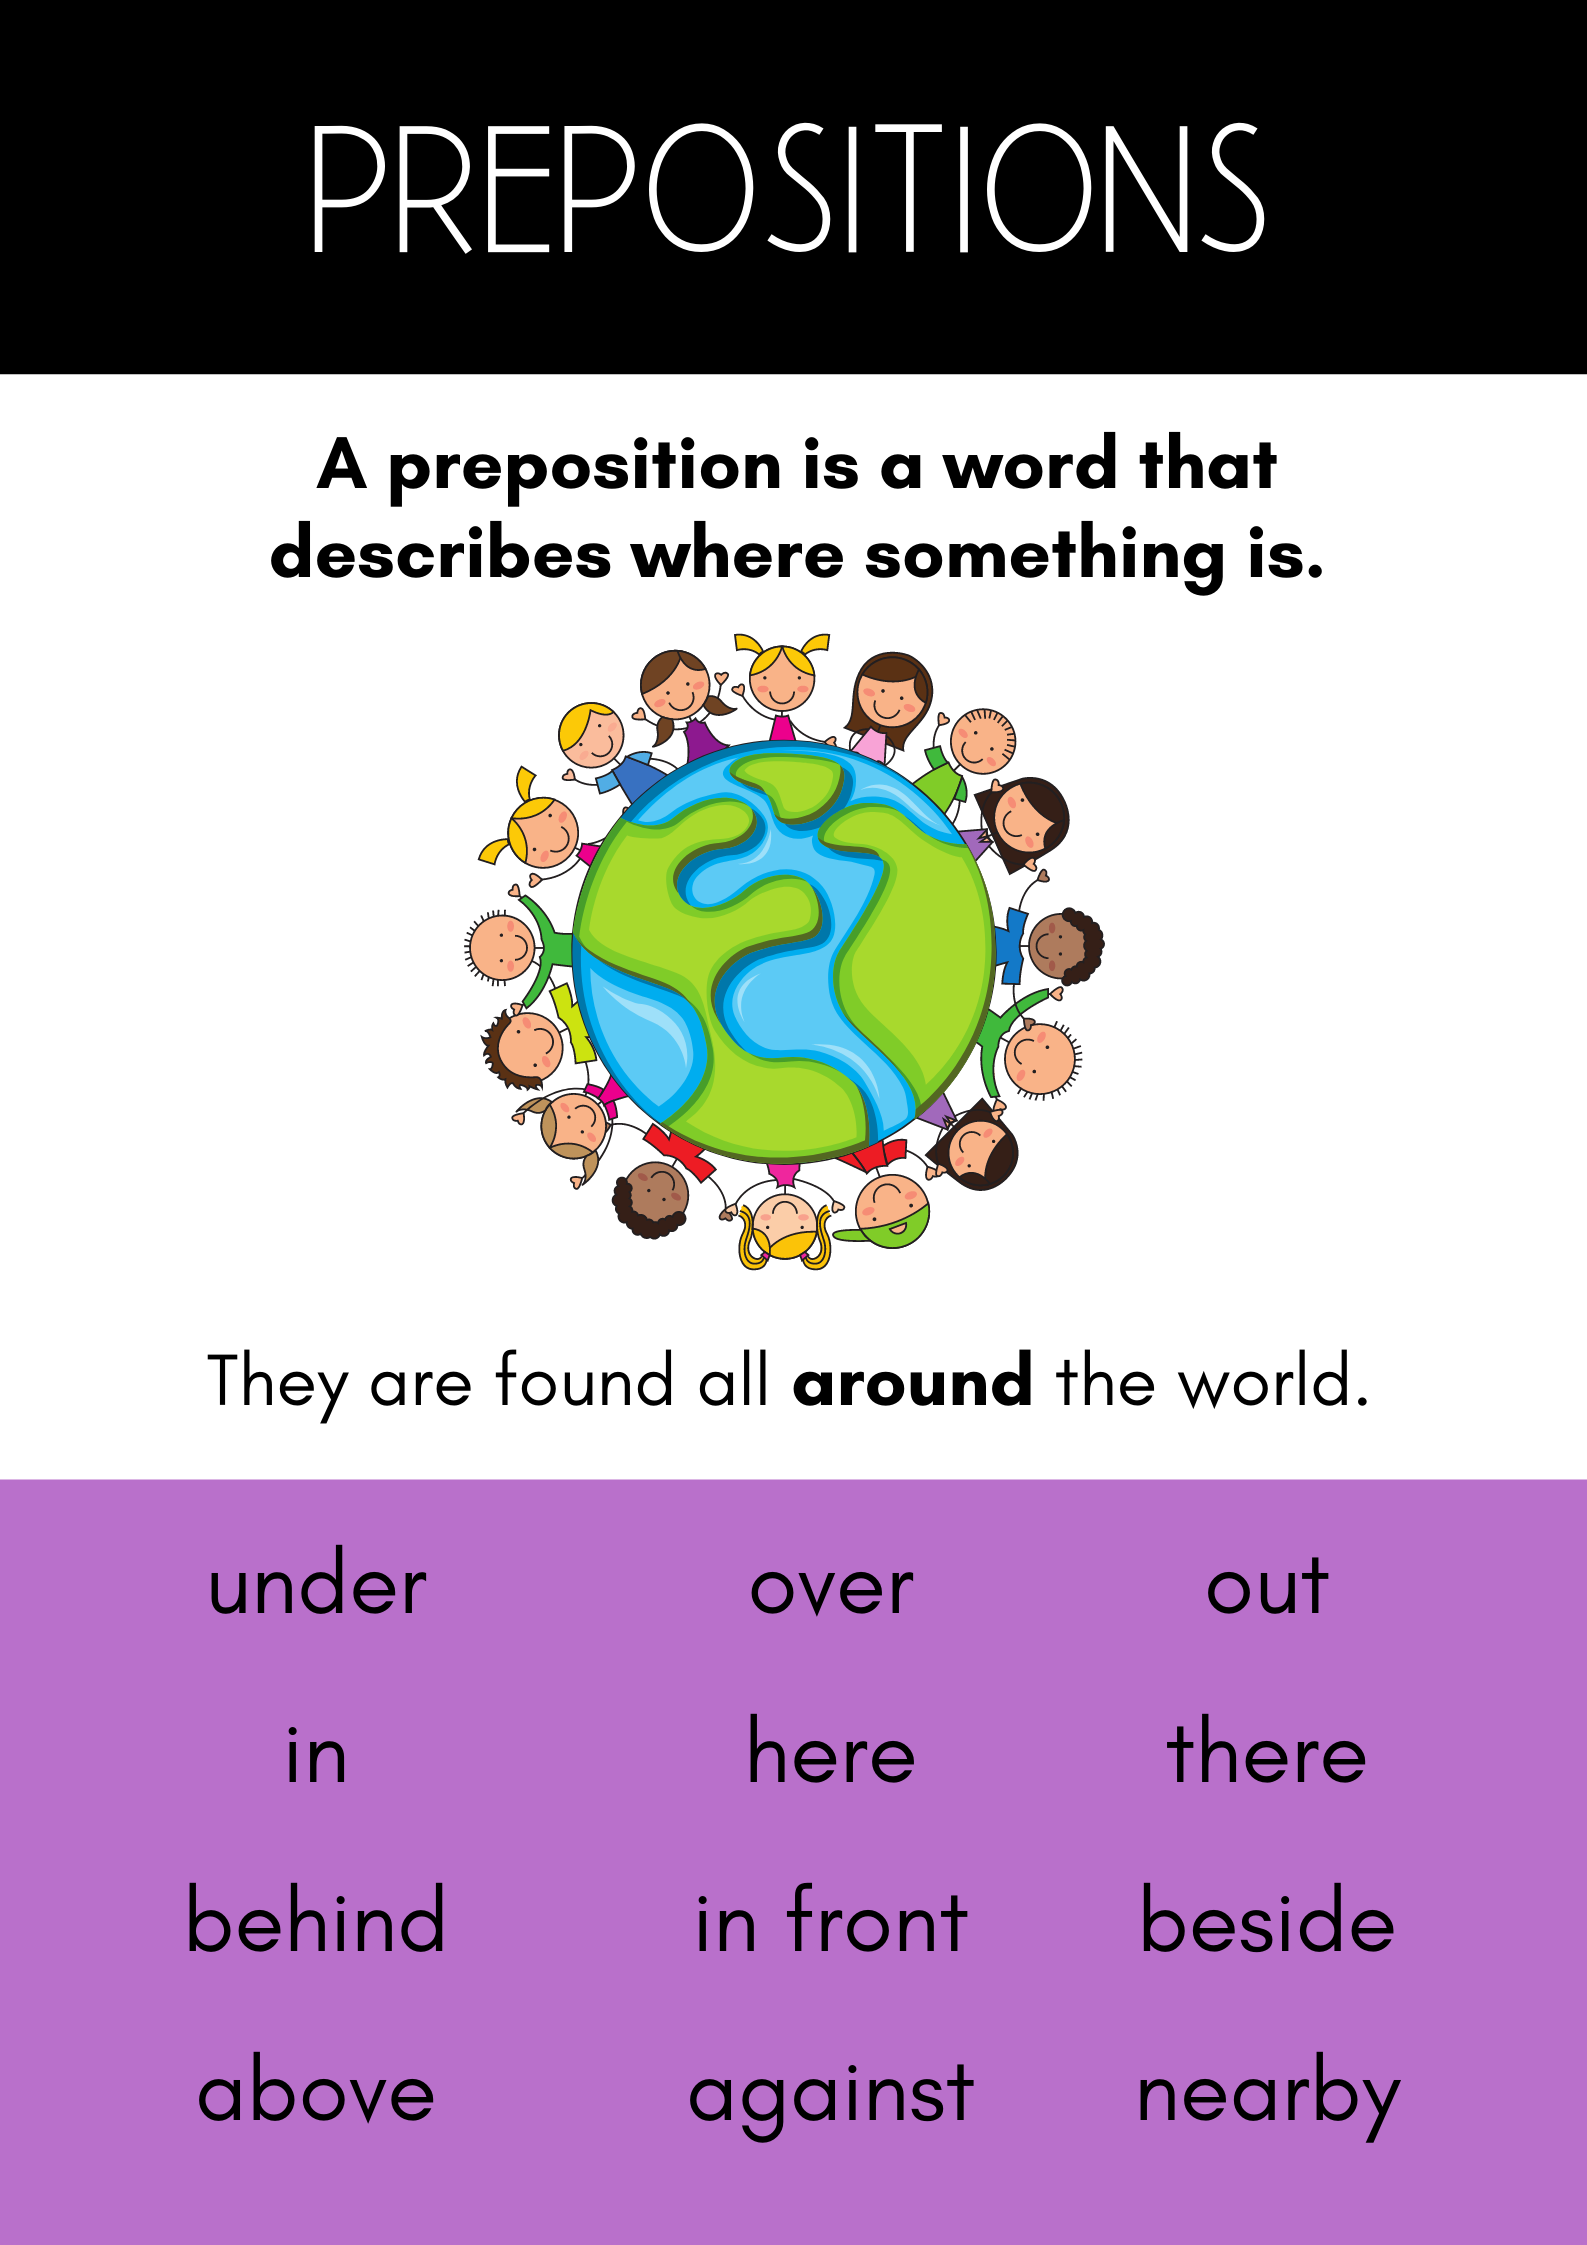 Prepositions are a fundamental feature of the English language